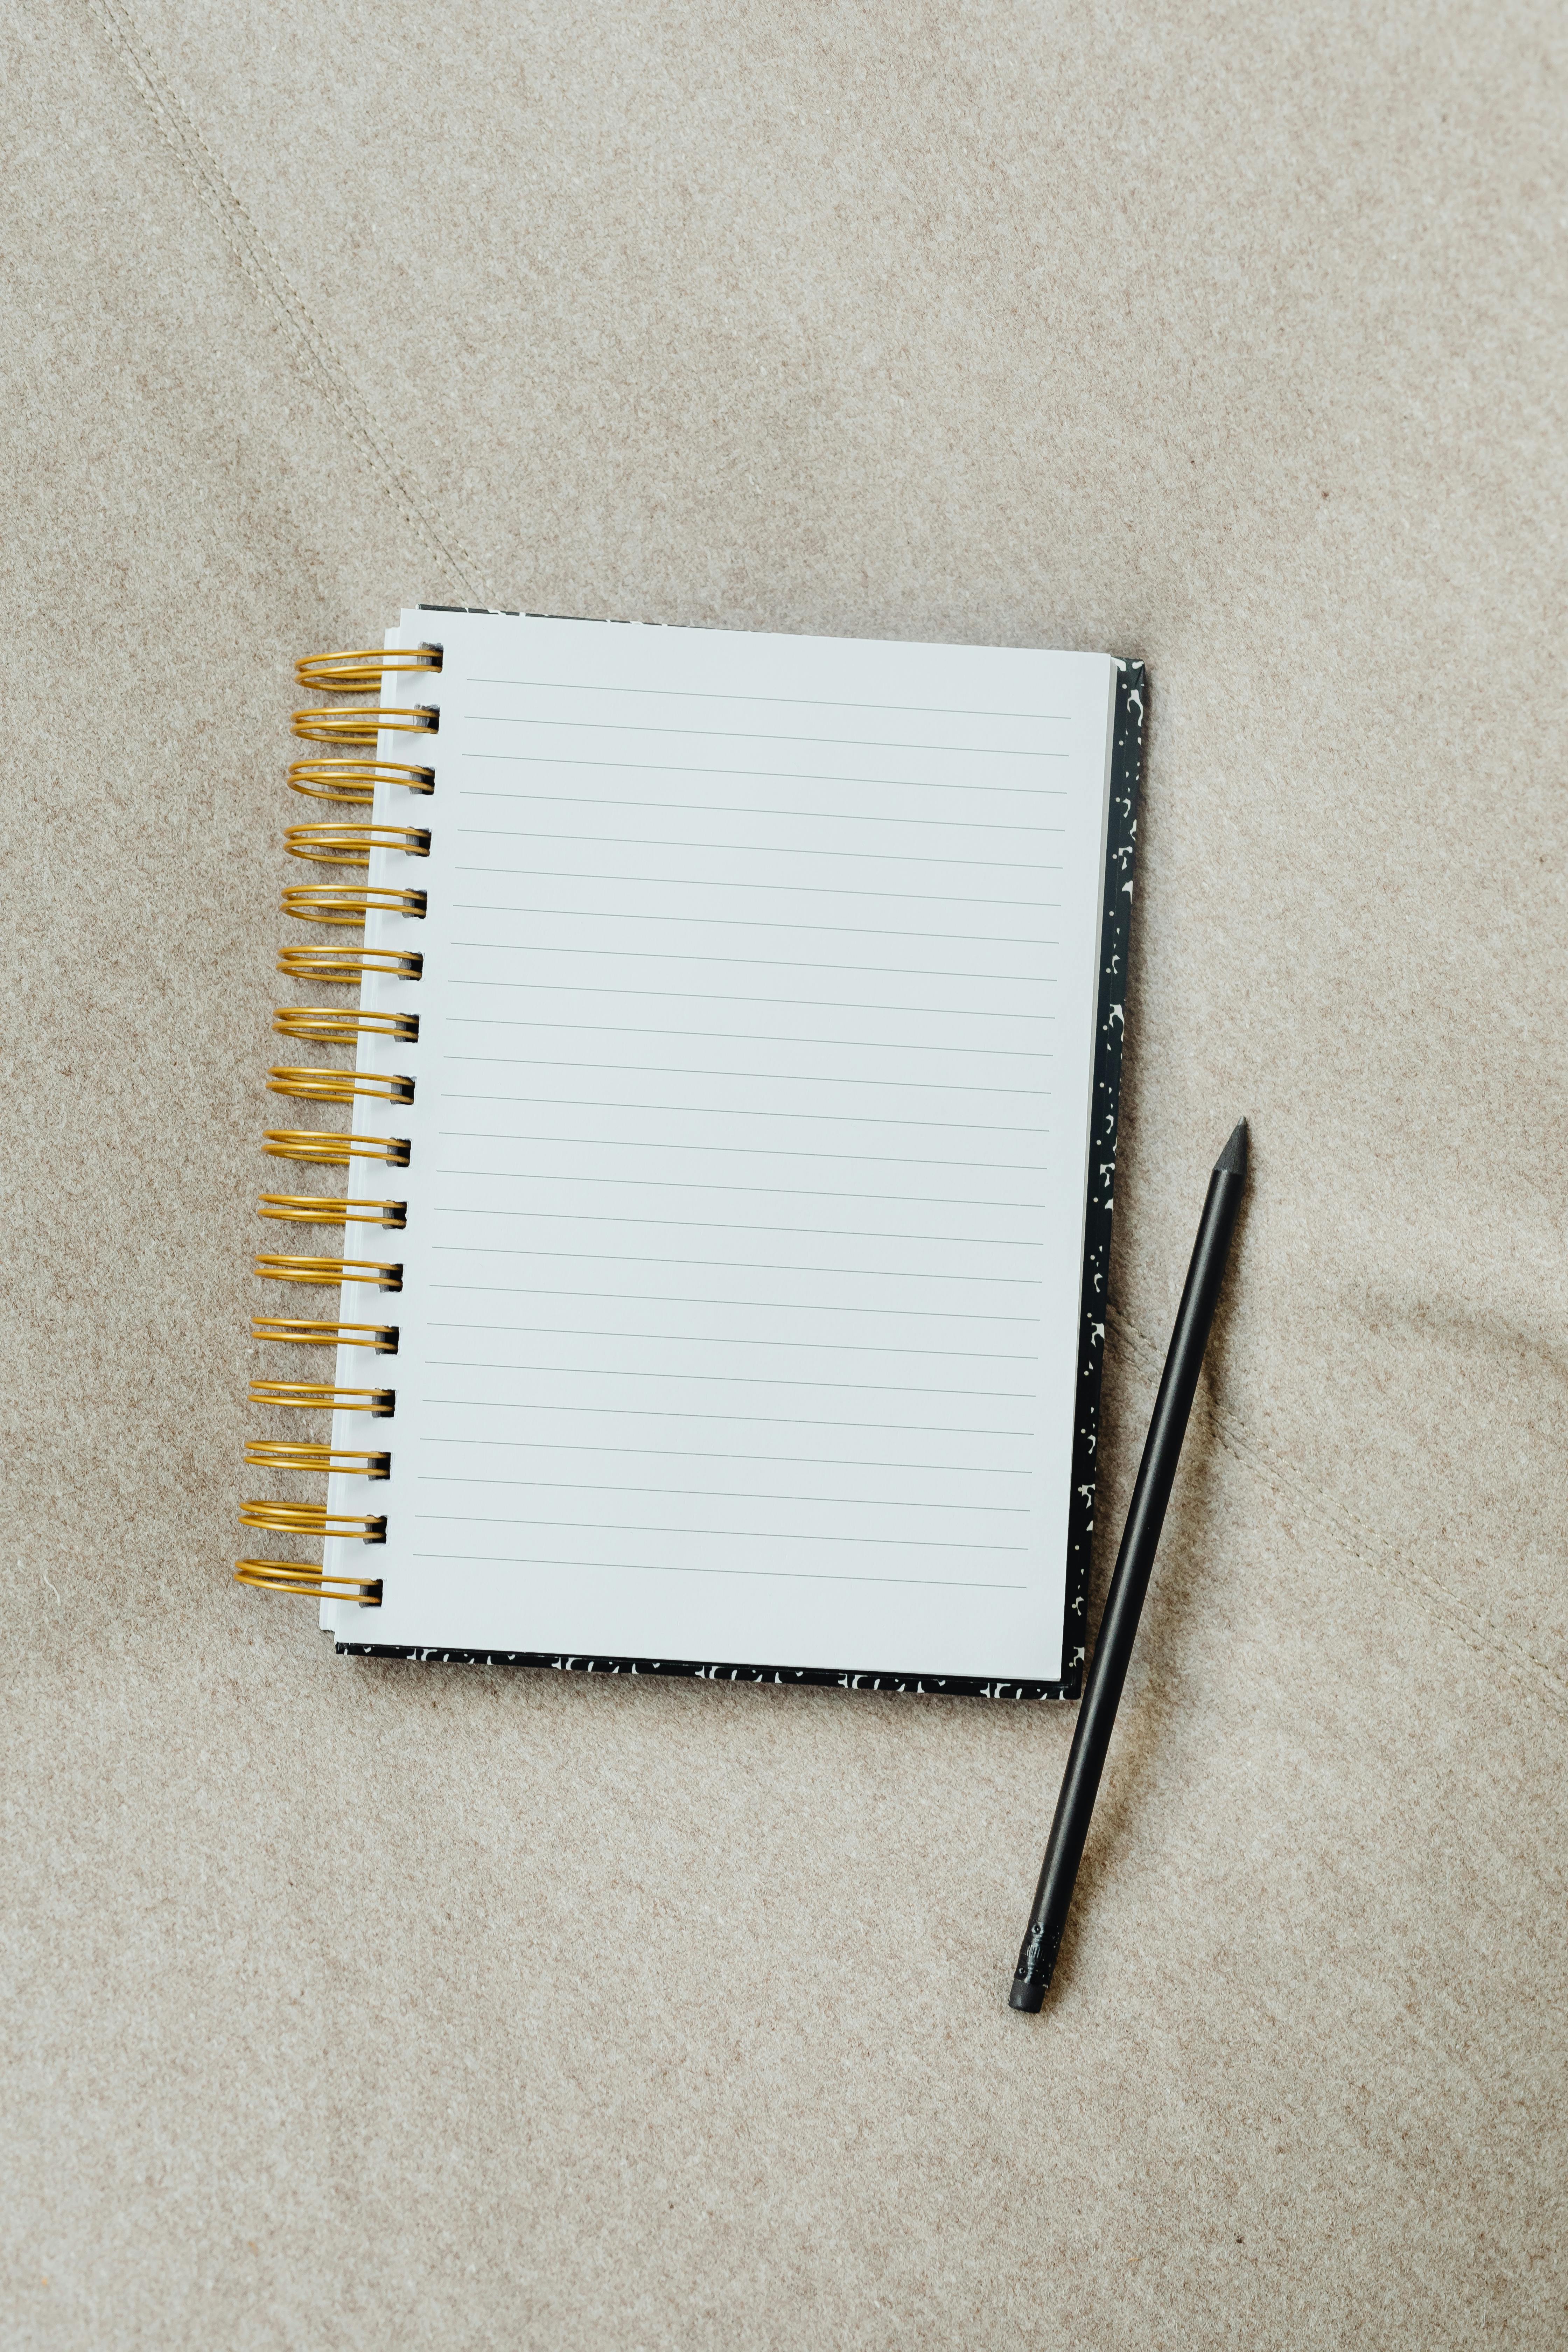 No Line Paper Note Book And Pencil Stock Photo, Picture and Royalty Free  Image. Image 65870843.